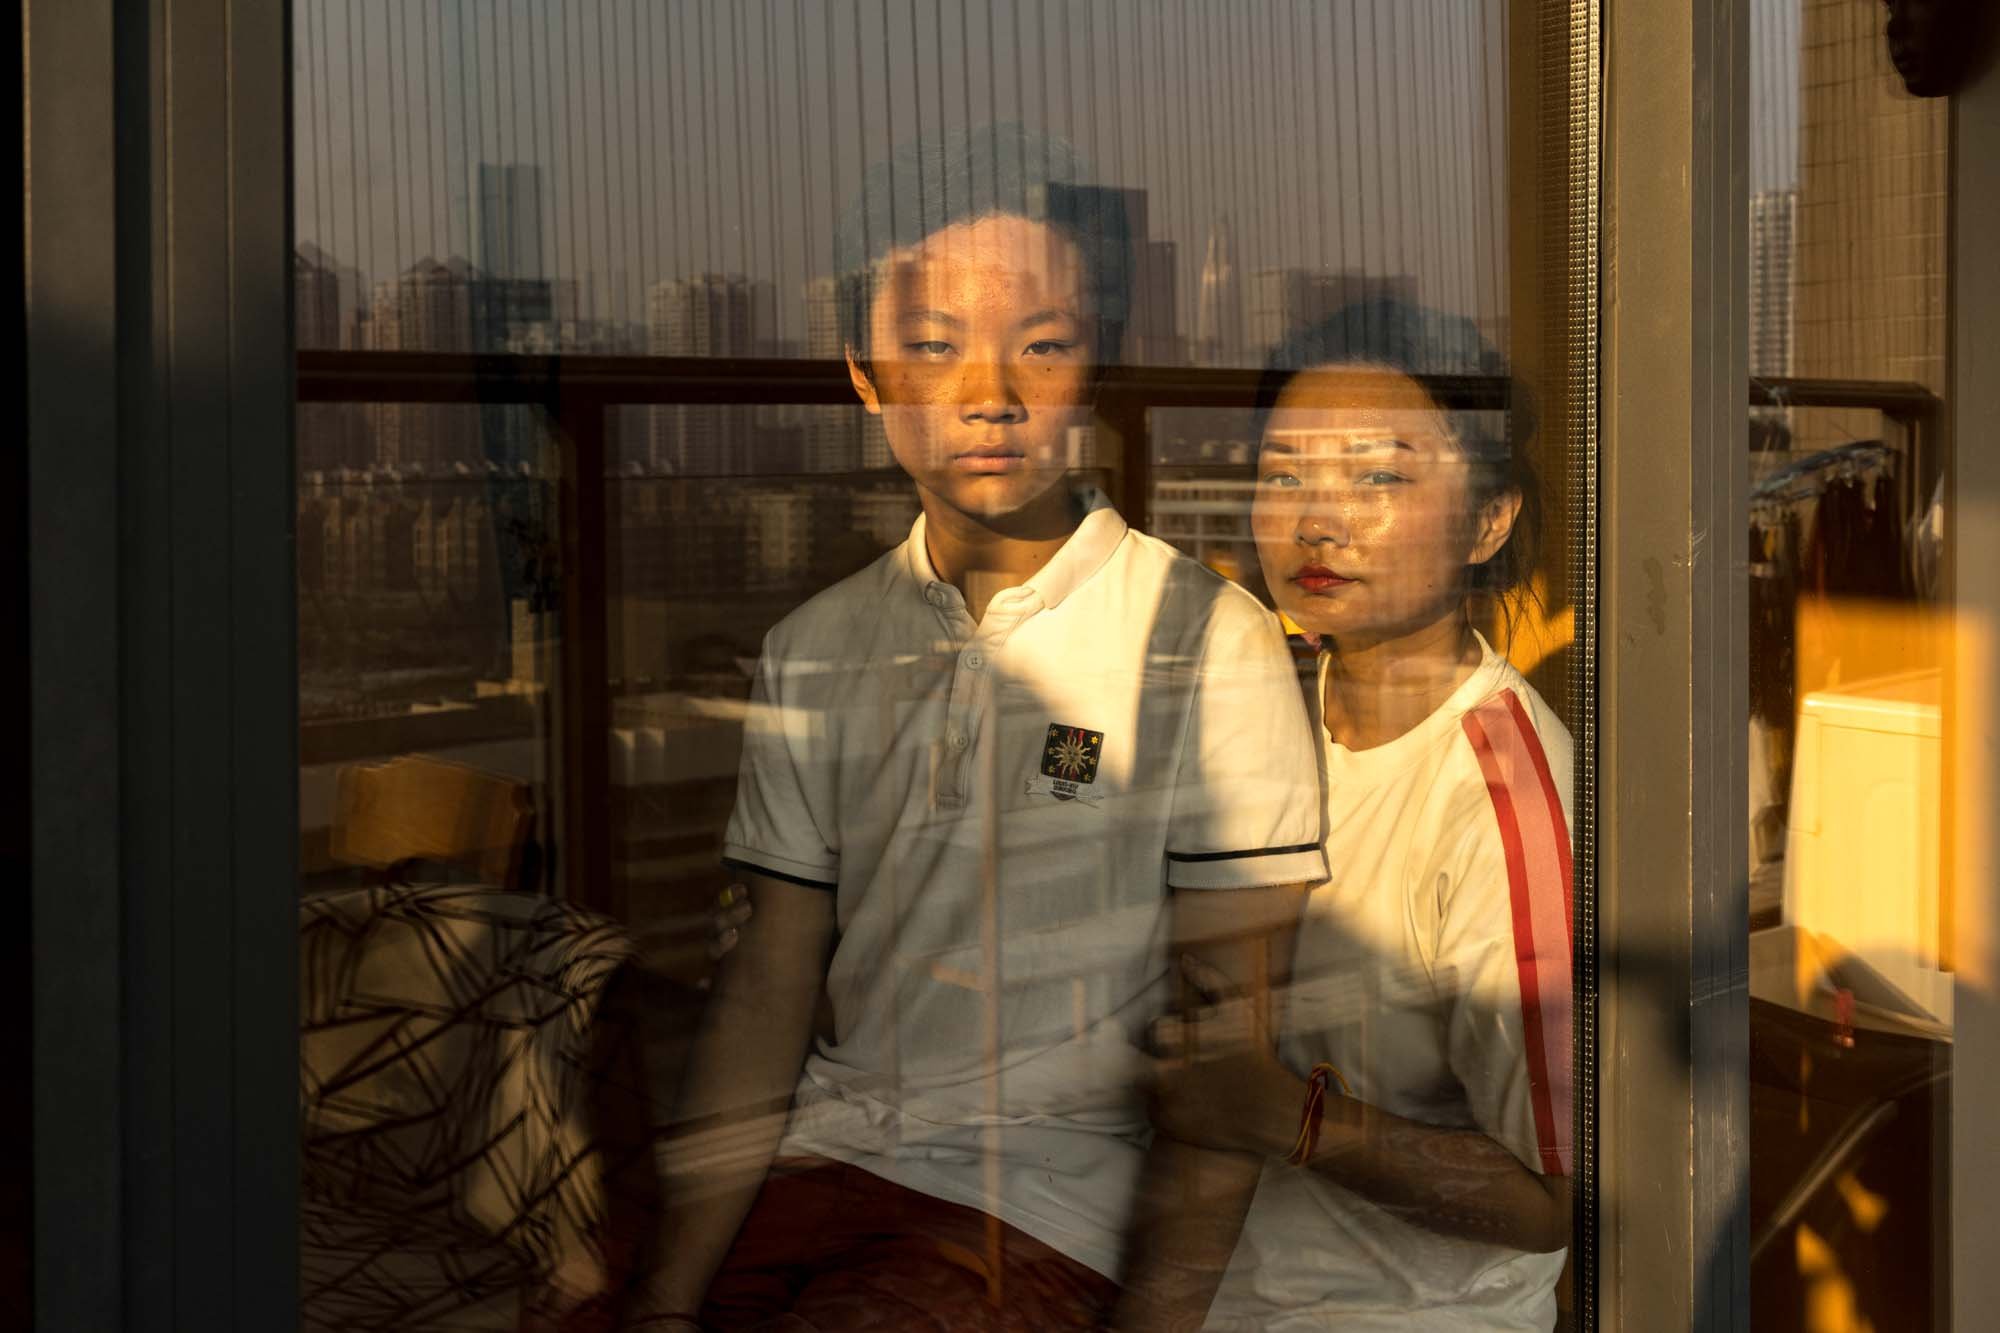  Liuchang and her son GuiBangLuoin their apartment in Shenzhen, China.Liuchang has been divorced and raise her son by herself for five years. 